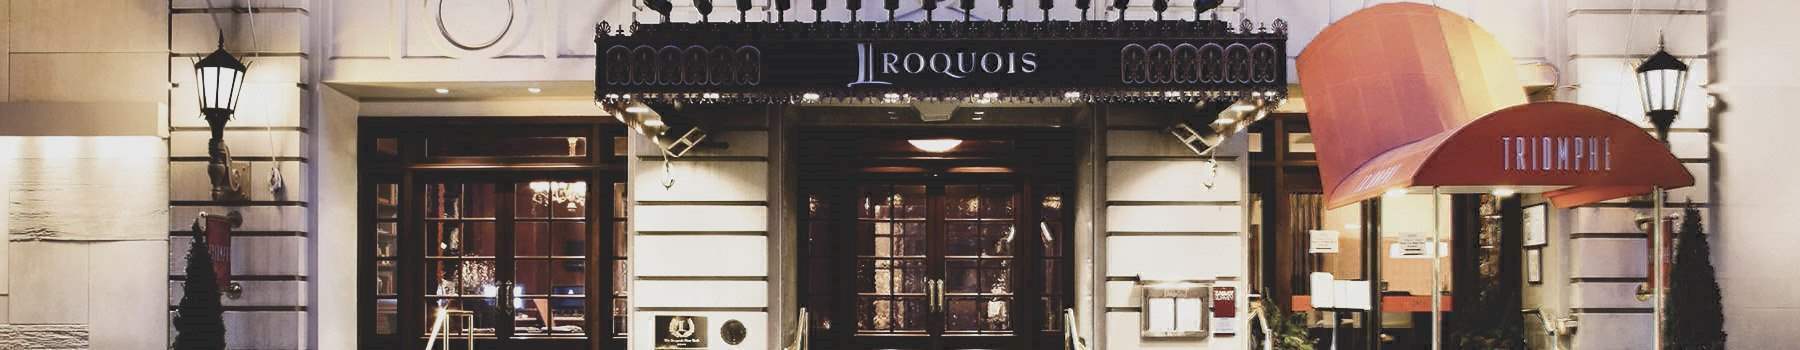 About The Iroquois Hotel New York